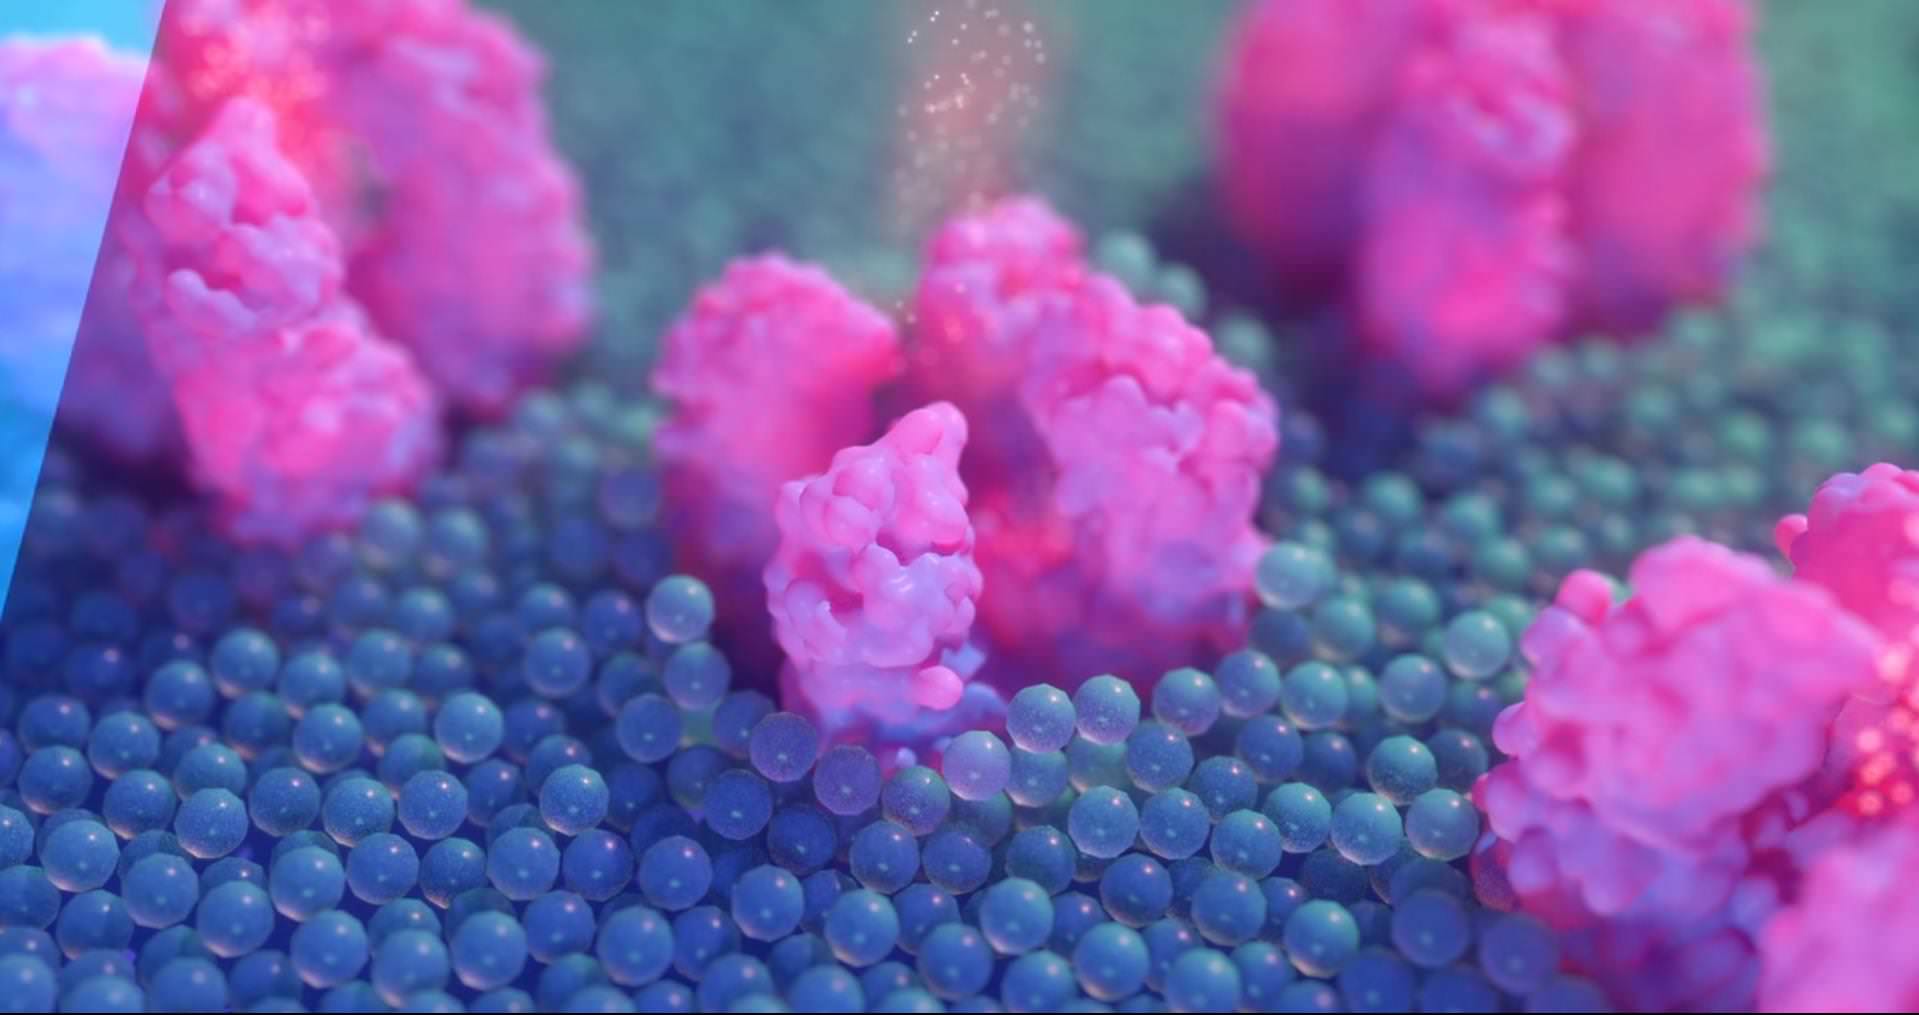 This image shows a pink and blue 3D animation of the mode of action of a single insecticide 